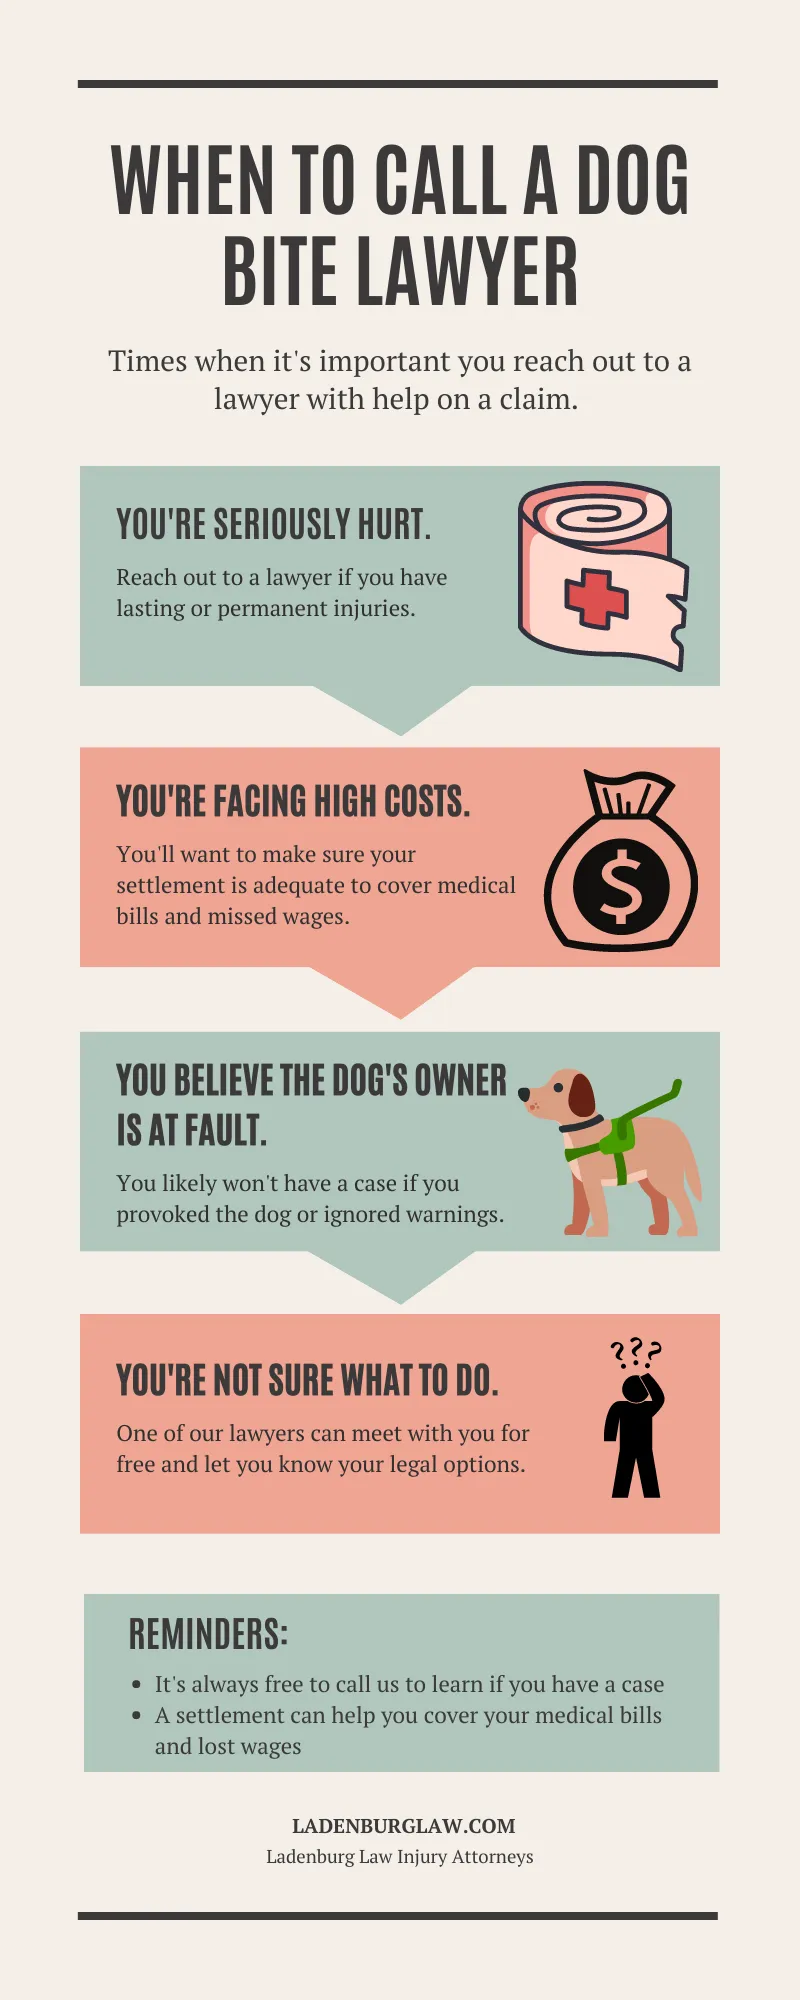 When to call a Dog Bite Lawyer for Help